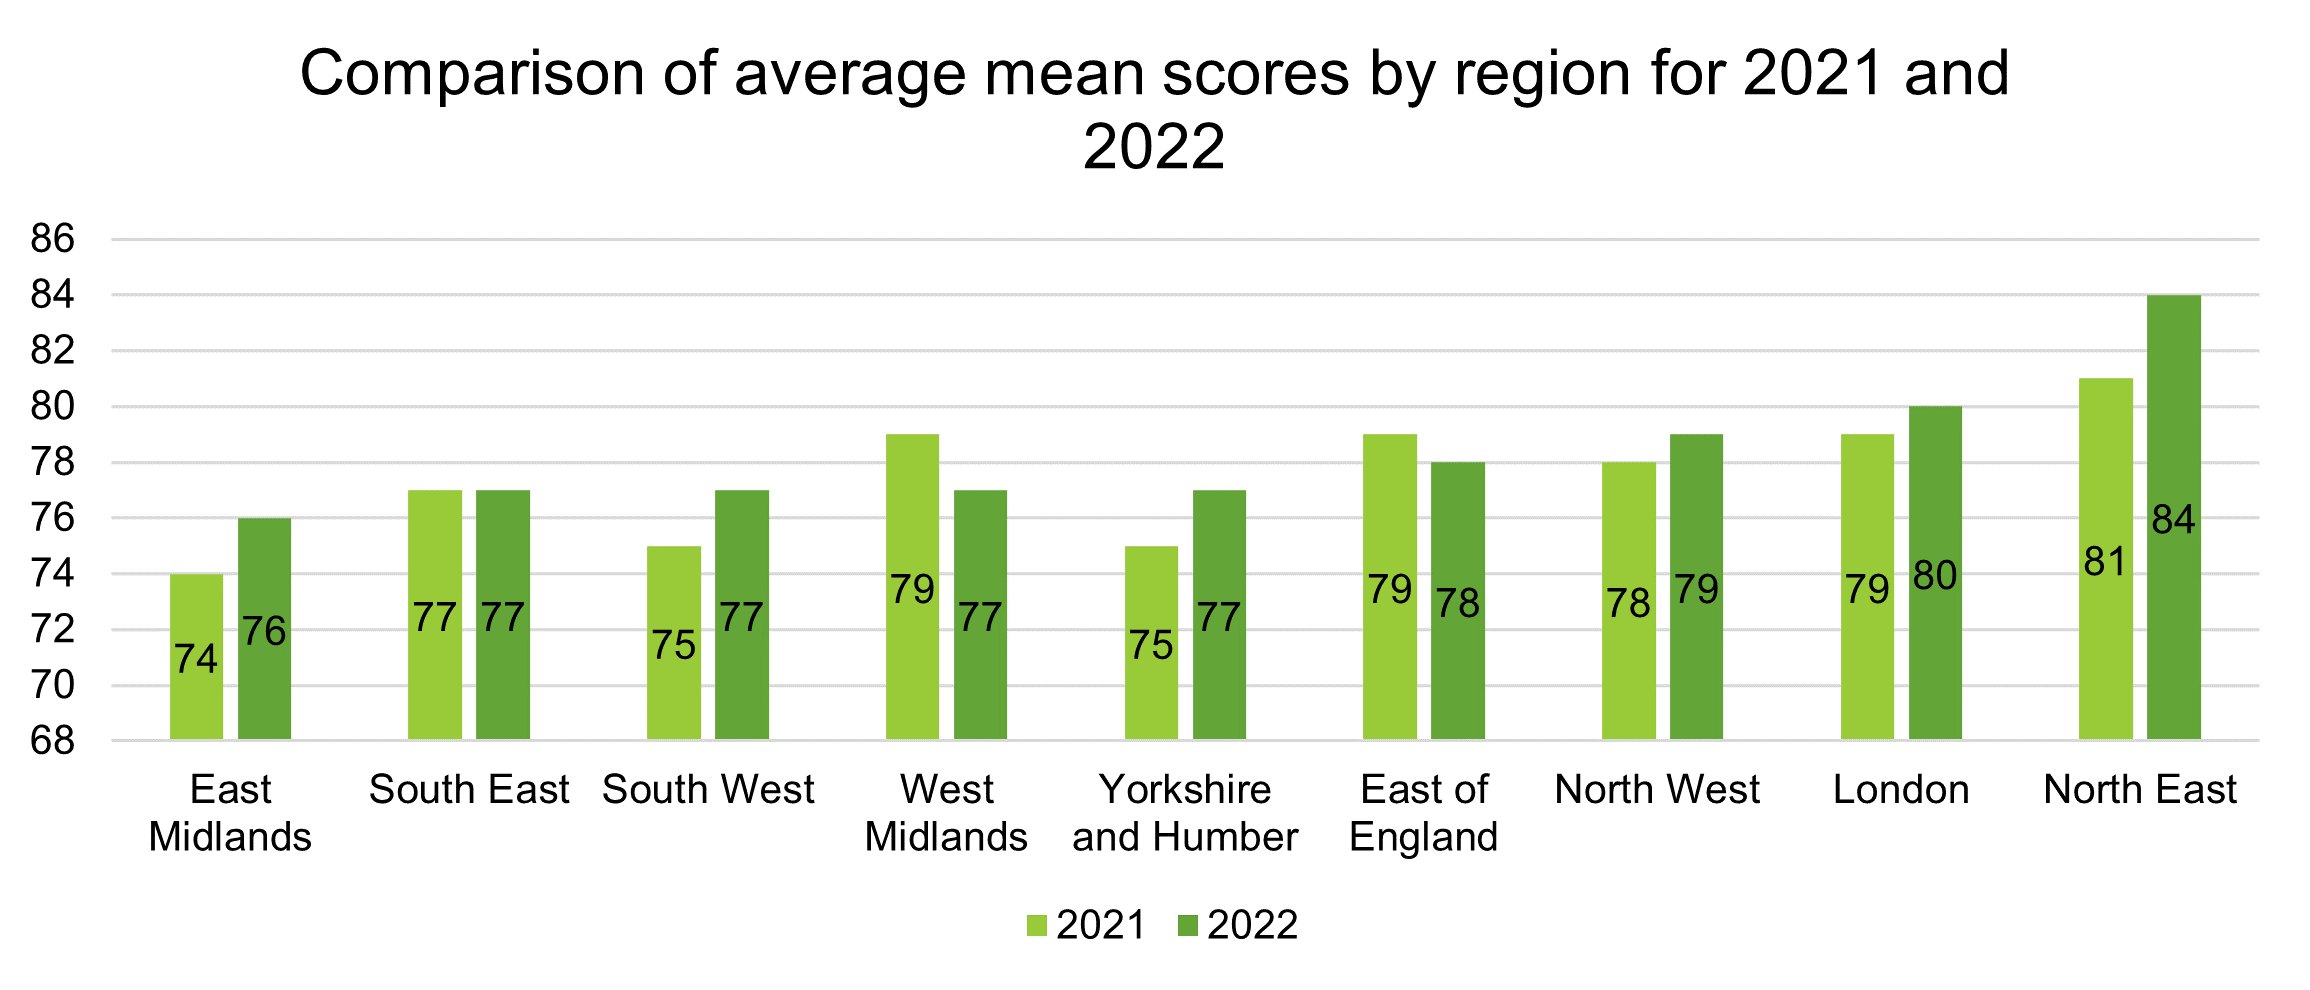 Chart showing comparison of average mean scores by region for 2021 and 2022 